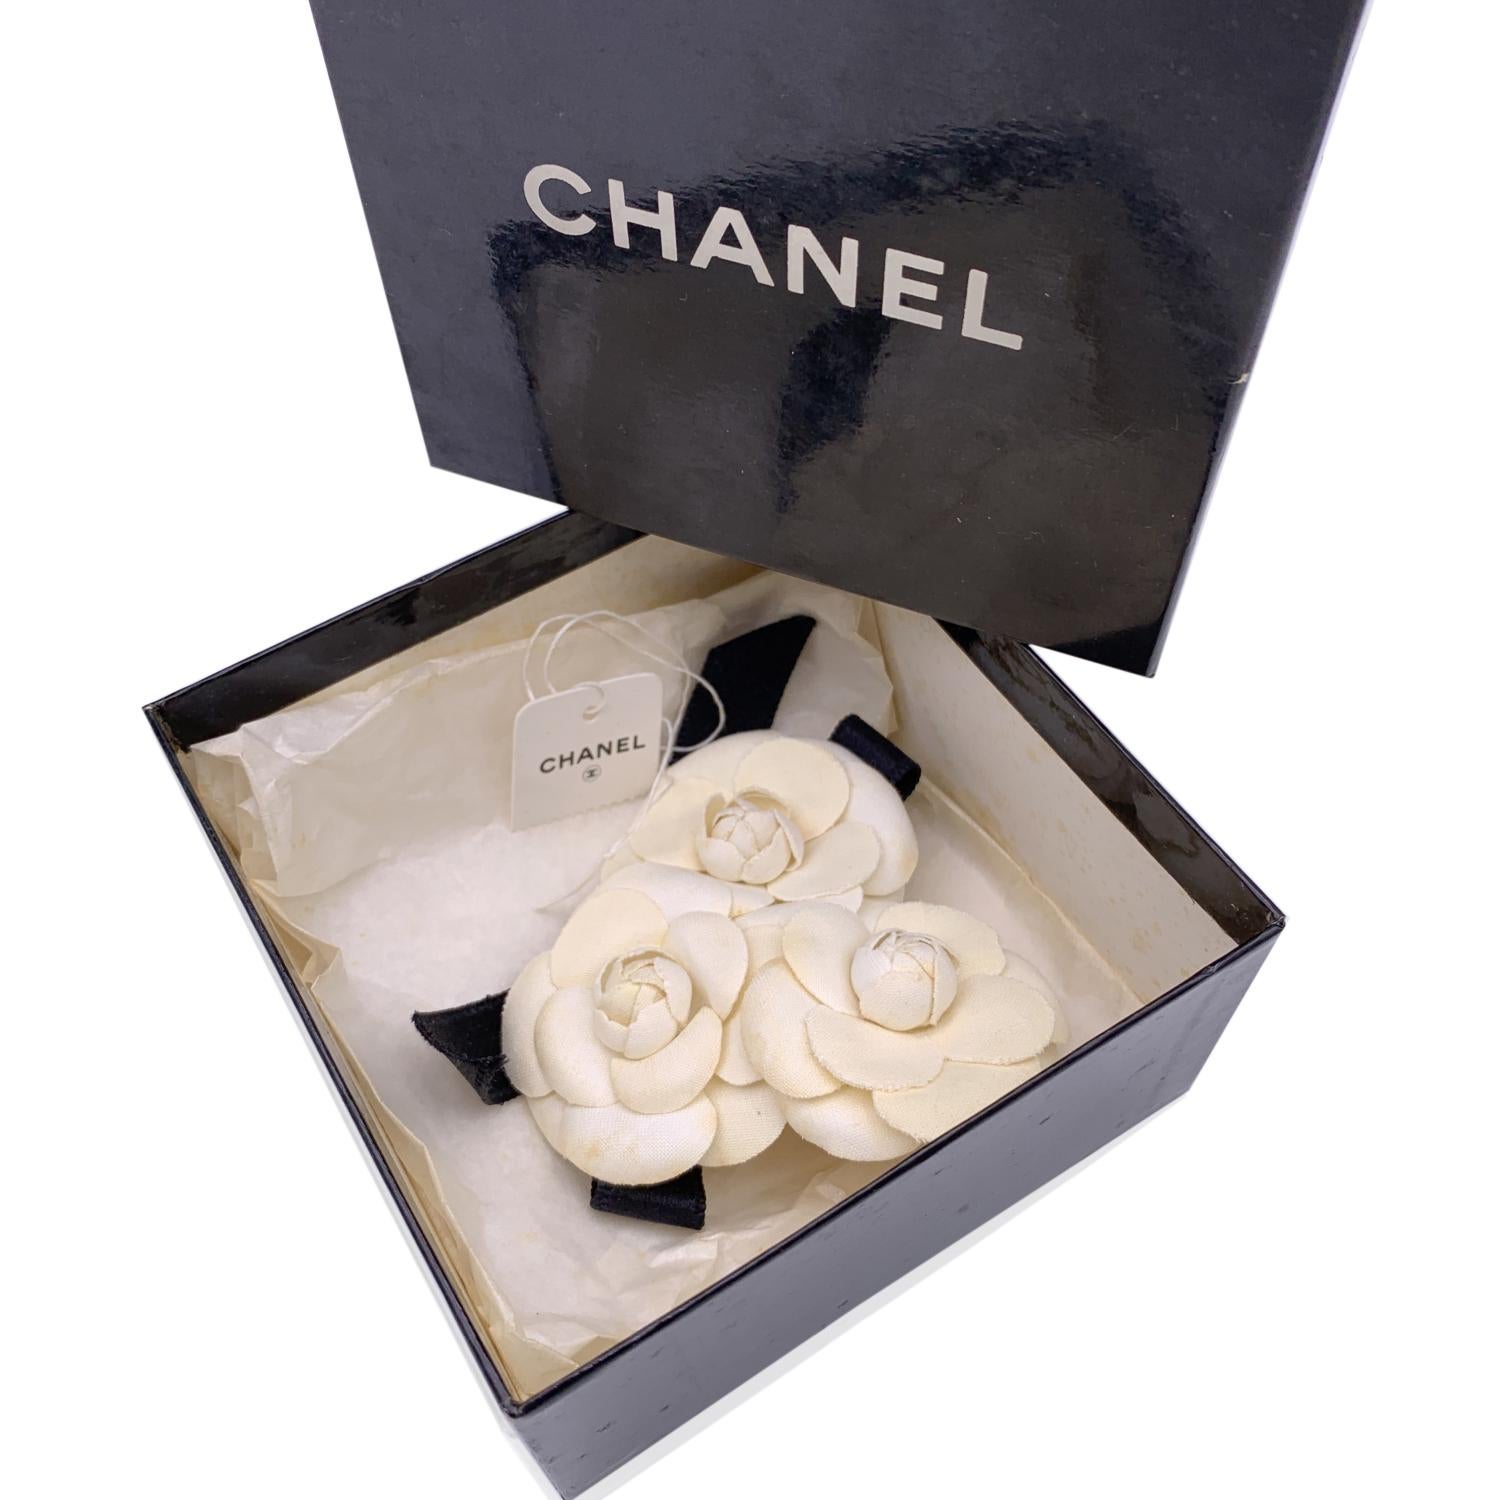 Chanel Vintage Triple Camelia Camellia Flower Pin Brooch. 3 white canvas flowers with black satin bow. Safety pin closure. Measurements (W x H): 4.5 x 3 inches - 11.5 x 7.6 cm. 'CHANEL - CC - Made in France' oval tab on the back

Condition

B - VERY